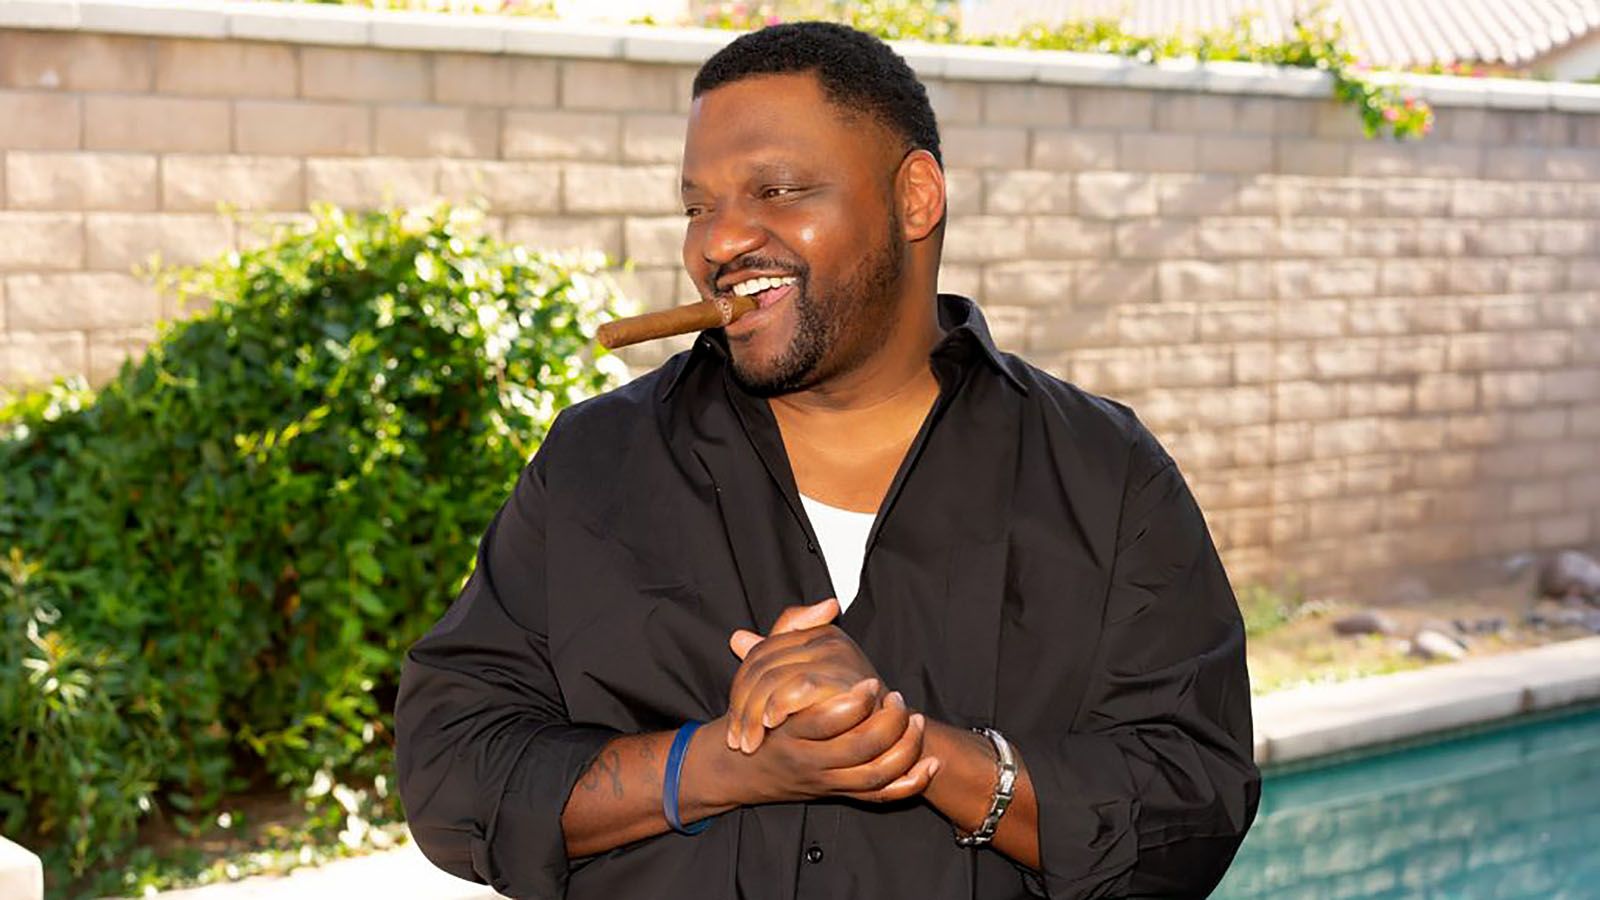 Aries Spears will be at Summit City Comedy Club from Dec. 15-17.